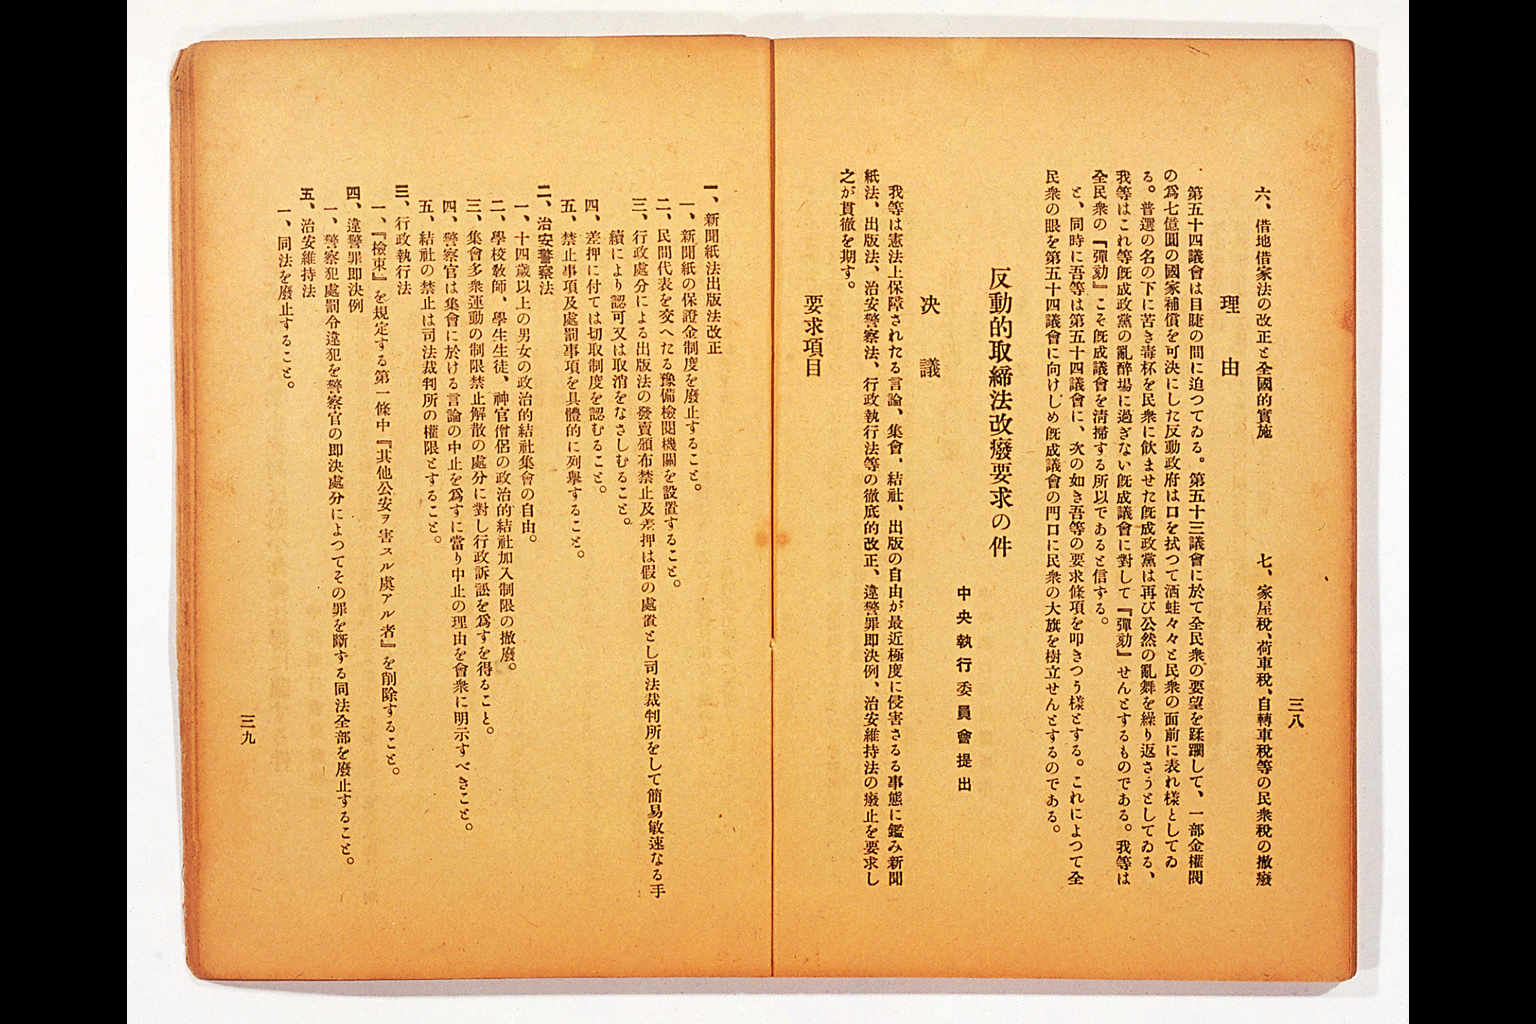 Measure and Report of the Japan Ronoto Party Headquarters, Presented at Its First National Convention(larger)